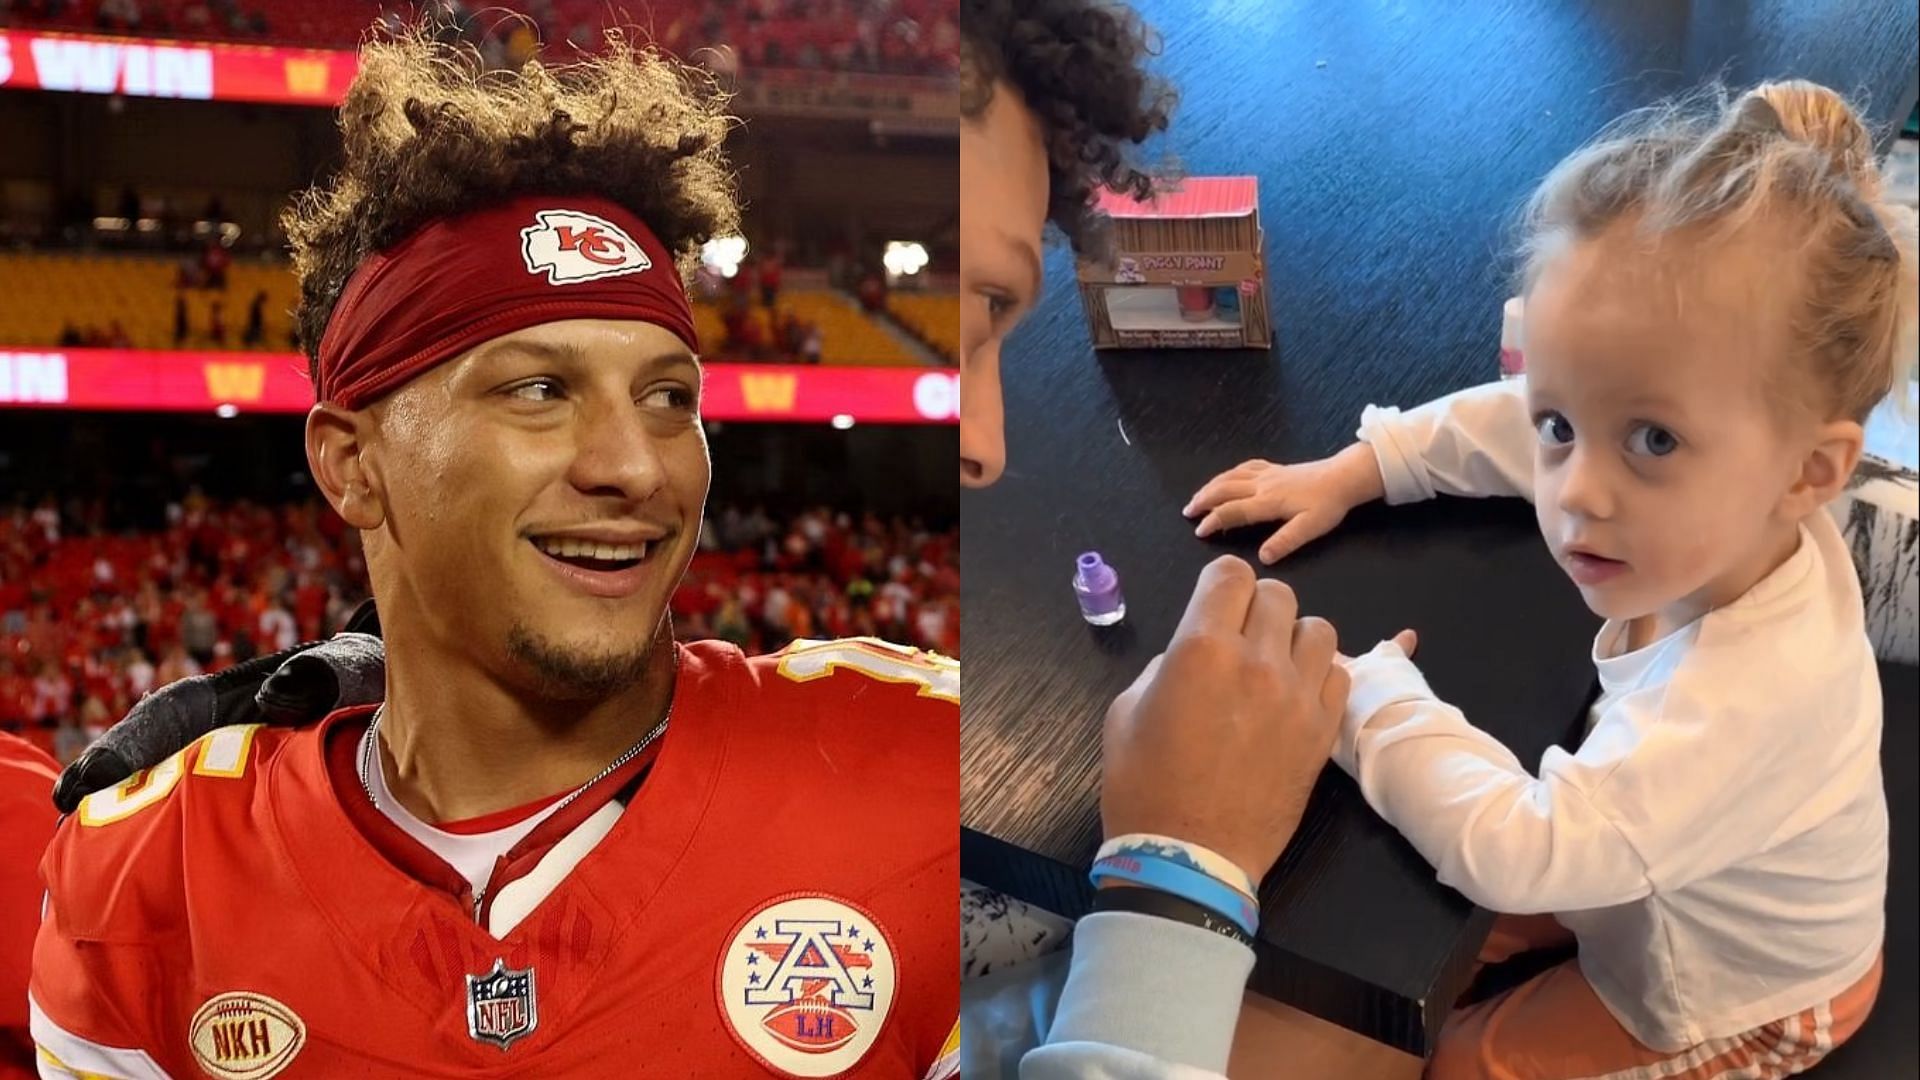 Patrick Mahomes enjoying some family time after a shocking loss at the disastrously hapless Broncos 